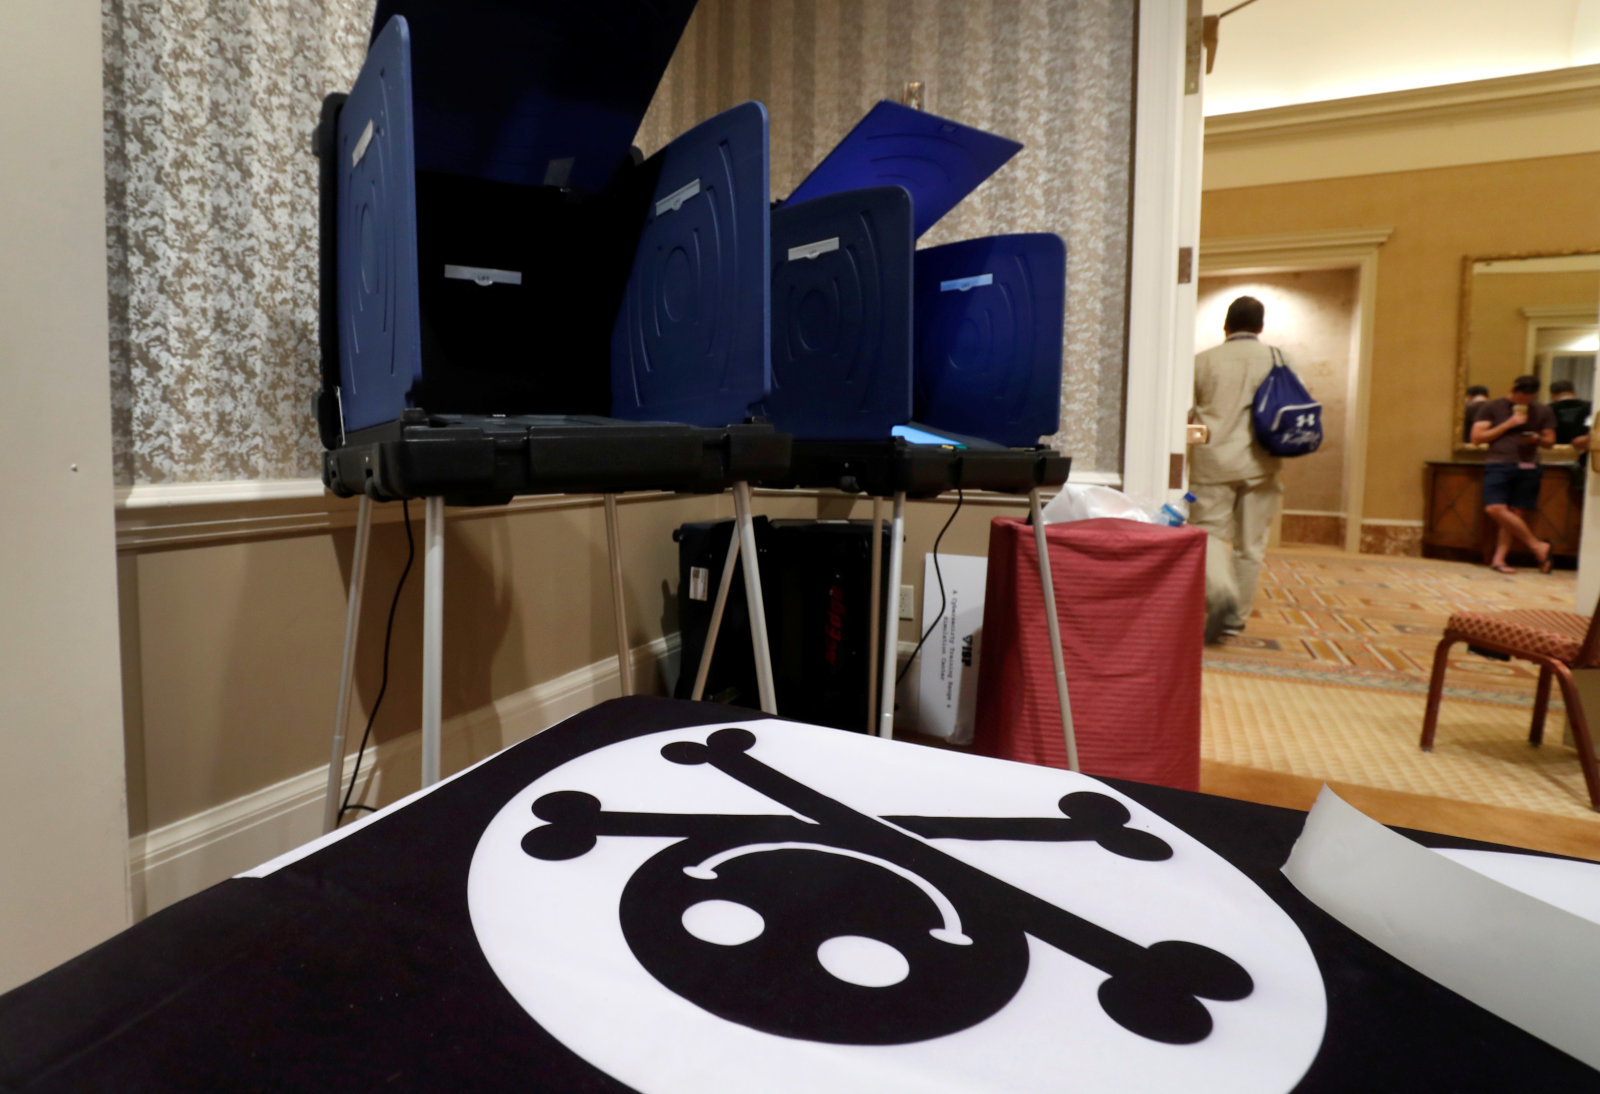 Voting machines are displayed in a Voting Machine Hacking Village during the Def Con hacker convention in Las Vegas, Nevada, U.S. on July 29, 2017. REUTERS/Steve Marcus